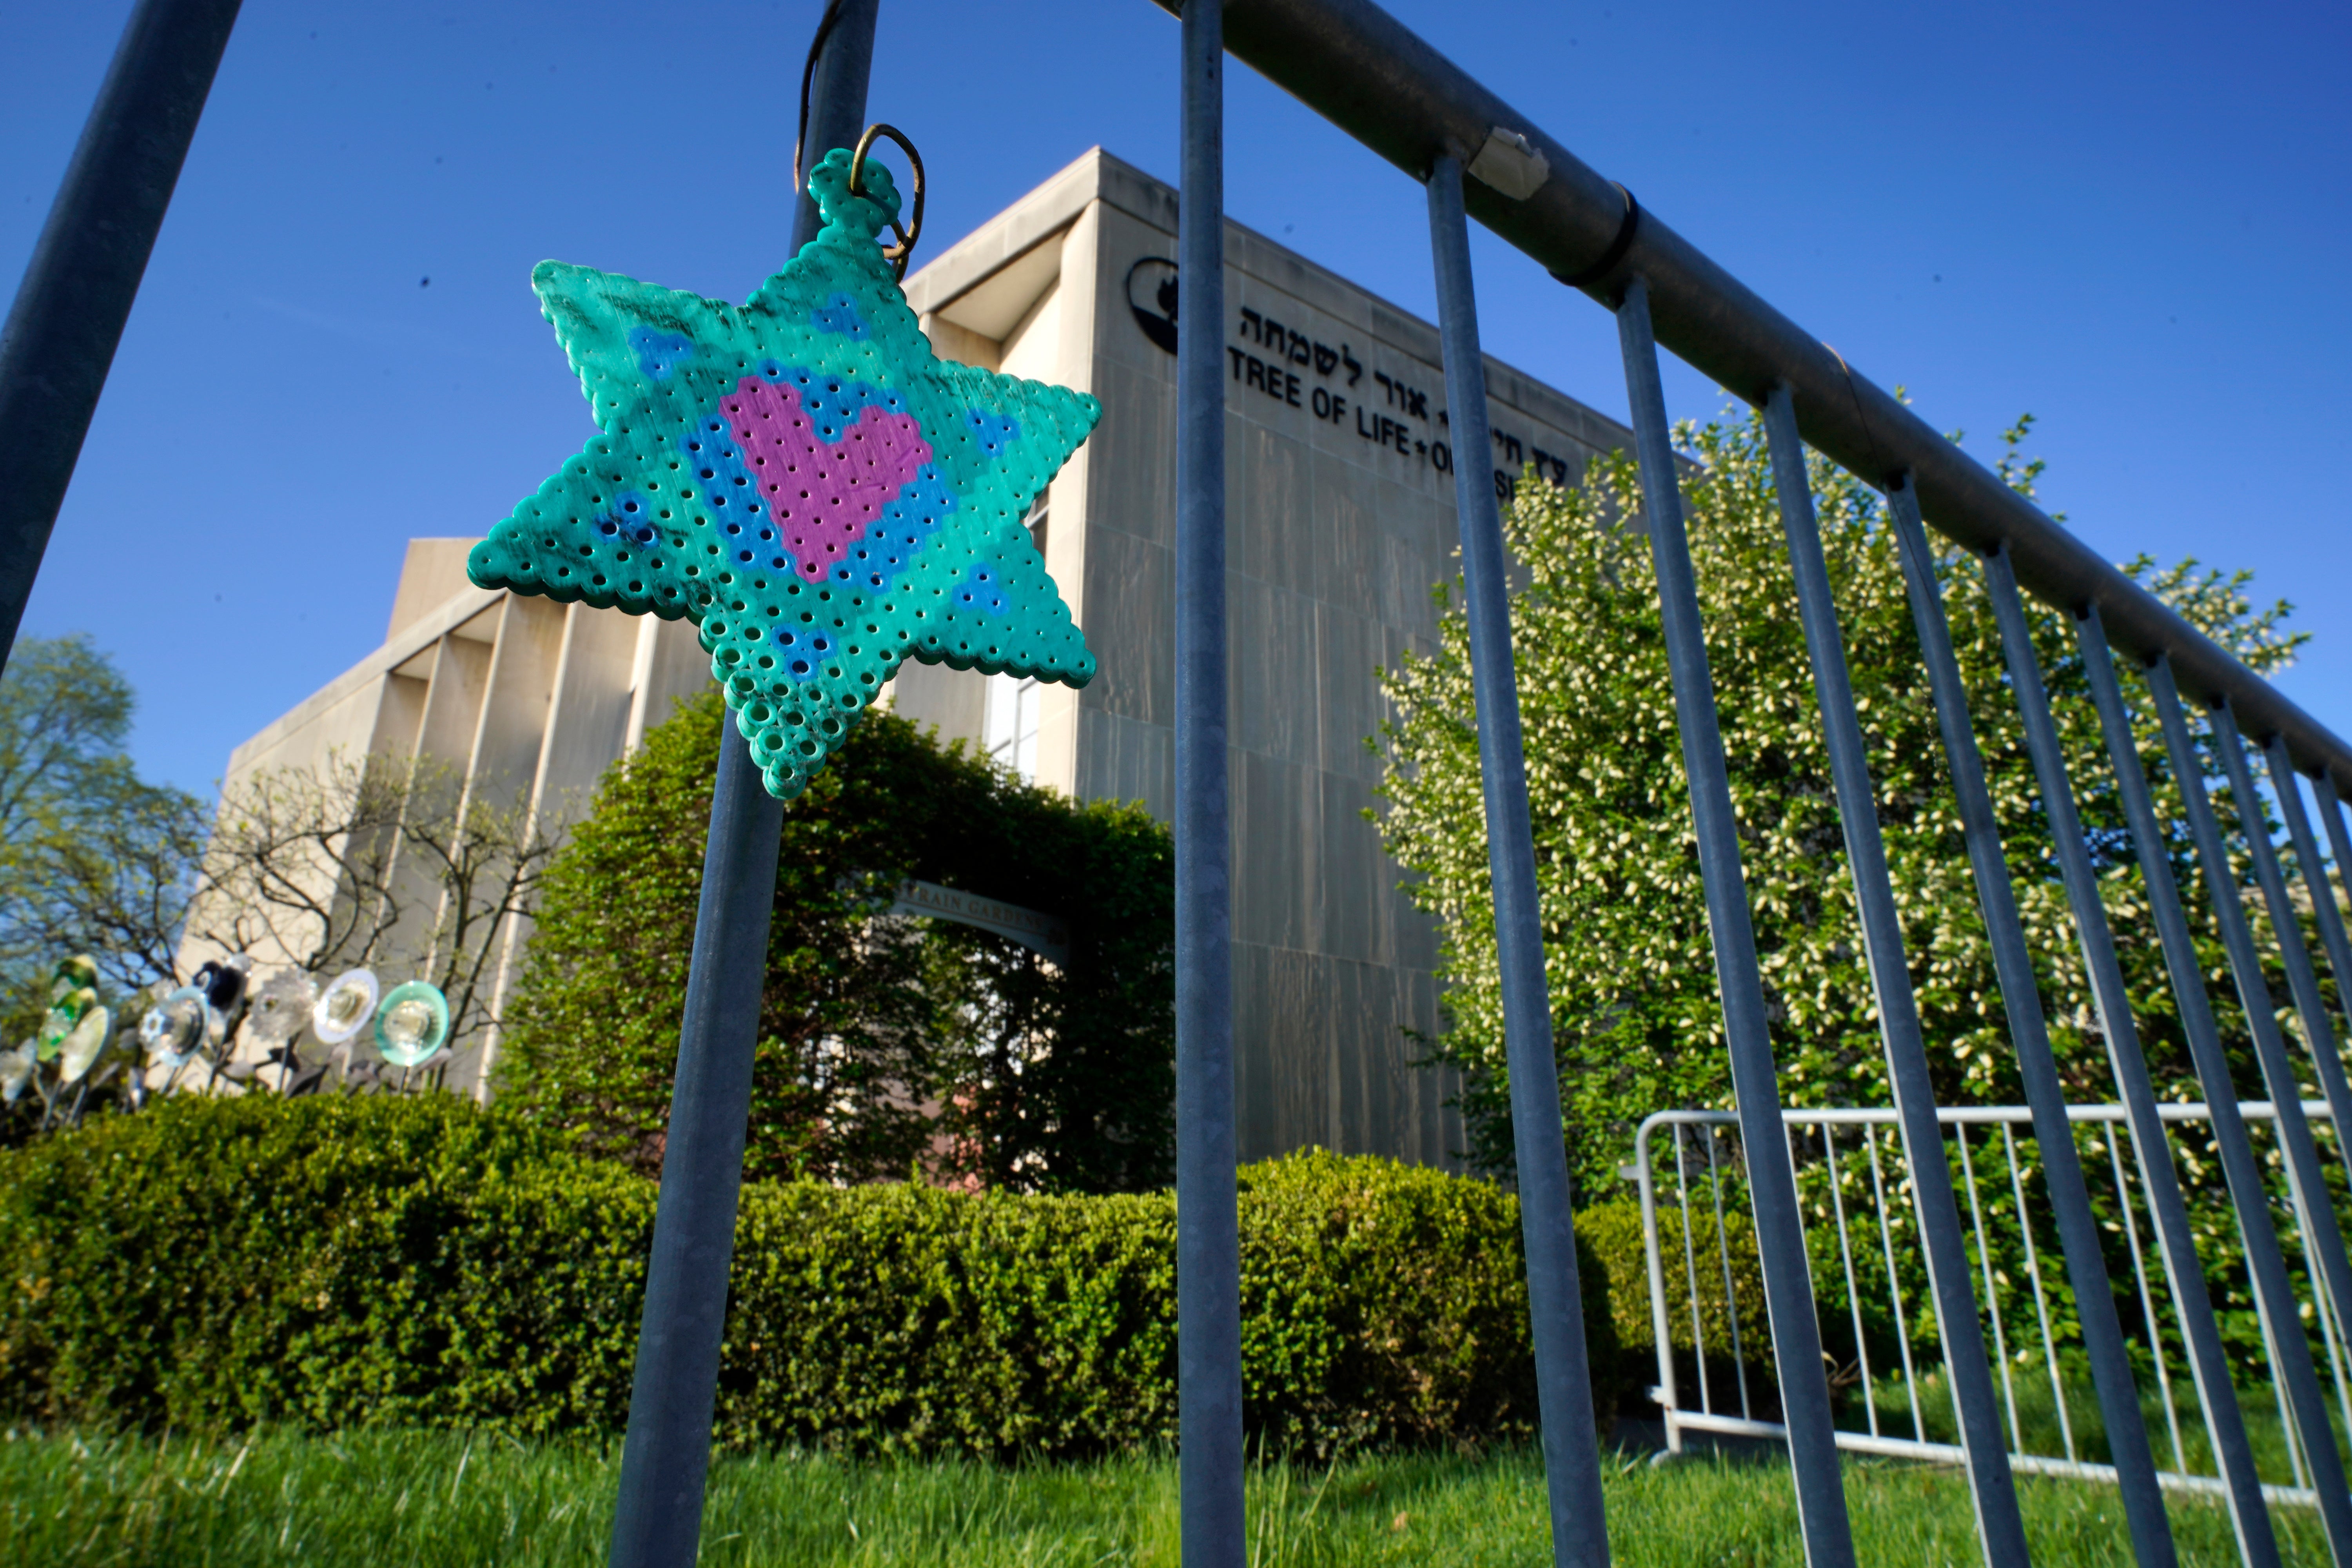 A Star of David hangs outside the Tree of Life synagogue in Pittsburgh where 11 worshippers were shot dead in 2018